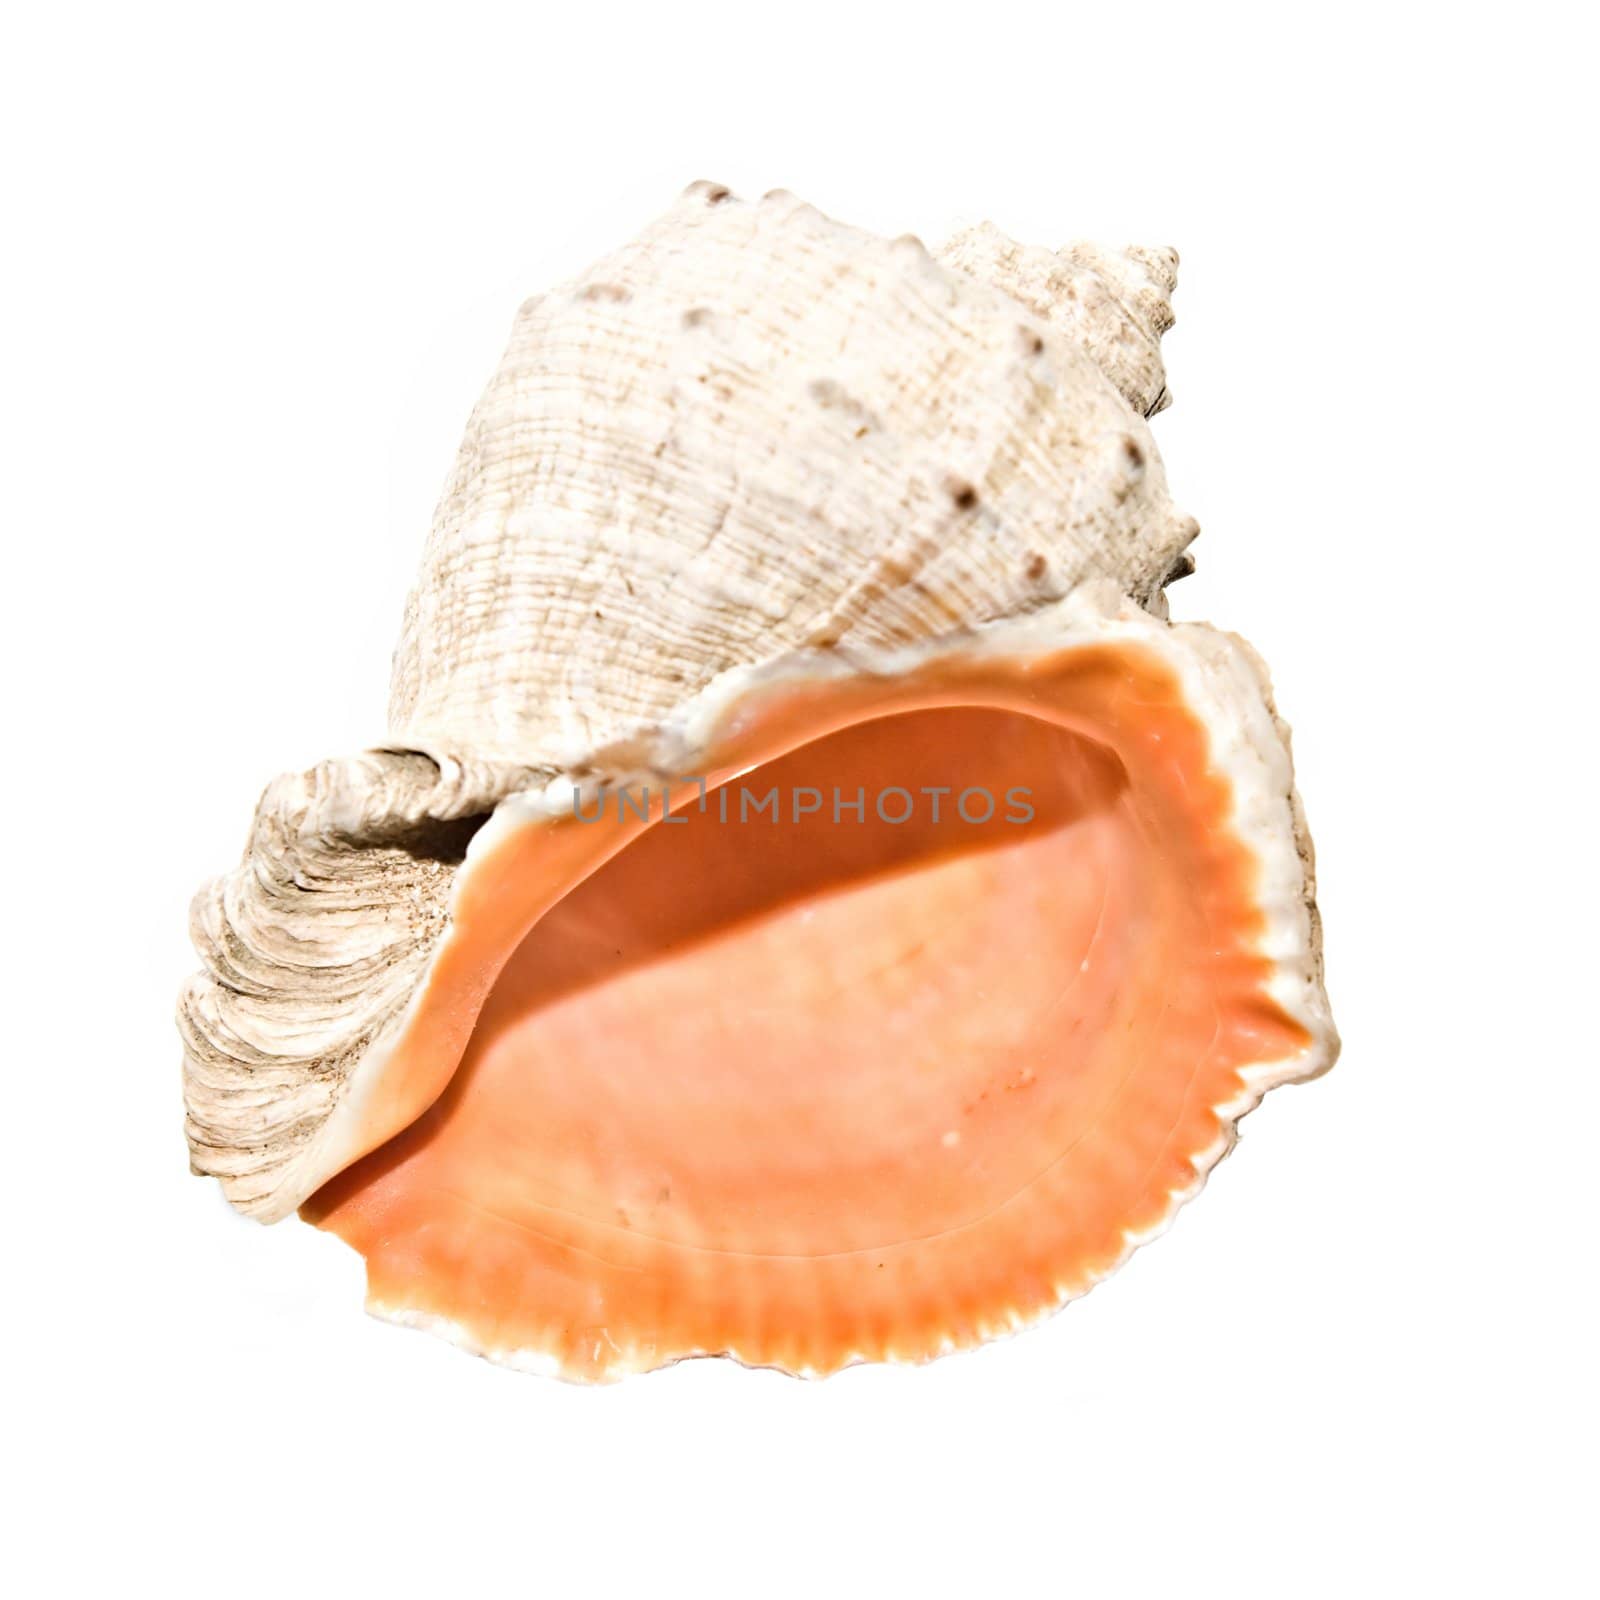 An isolated photo of a pink sea shell